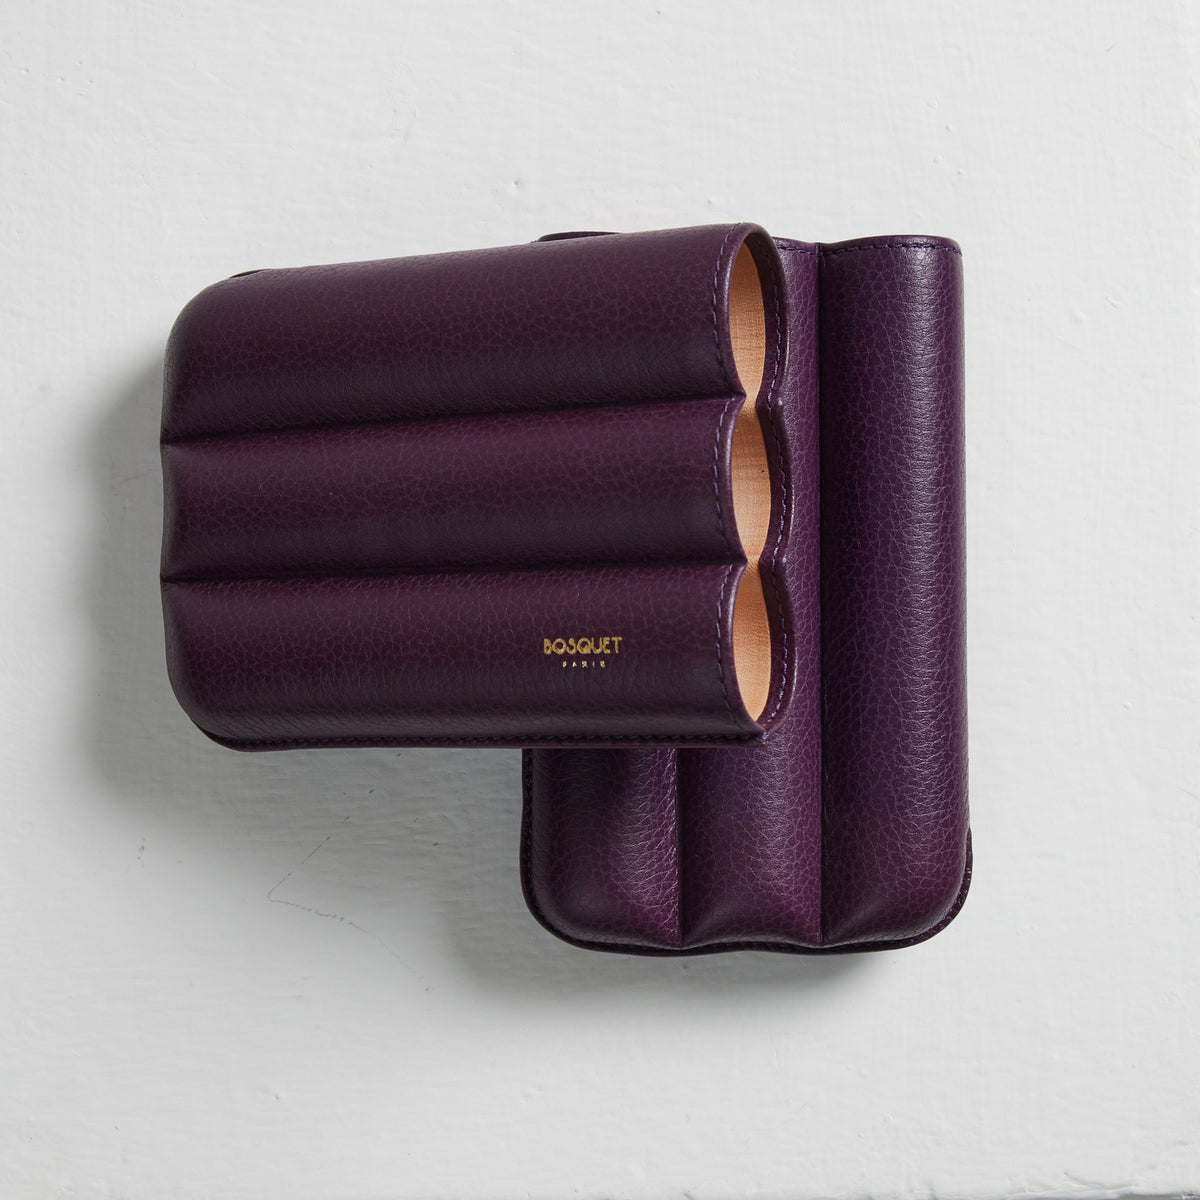 A Bosque Bosquet Smooth Purple Cylindrical Leather Cigar Case displayed on a white wall.